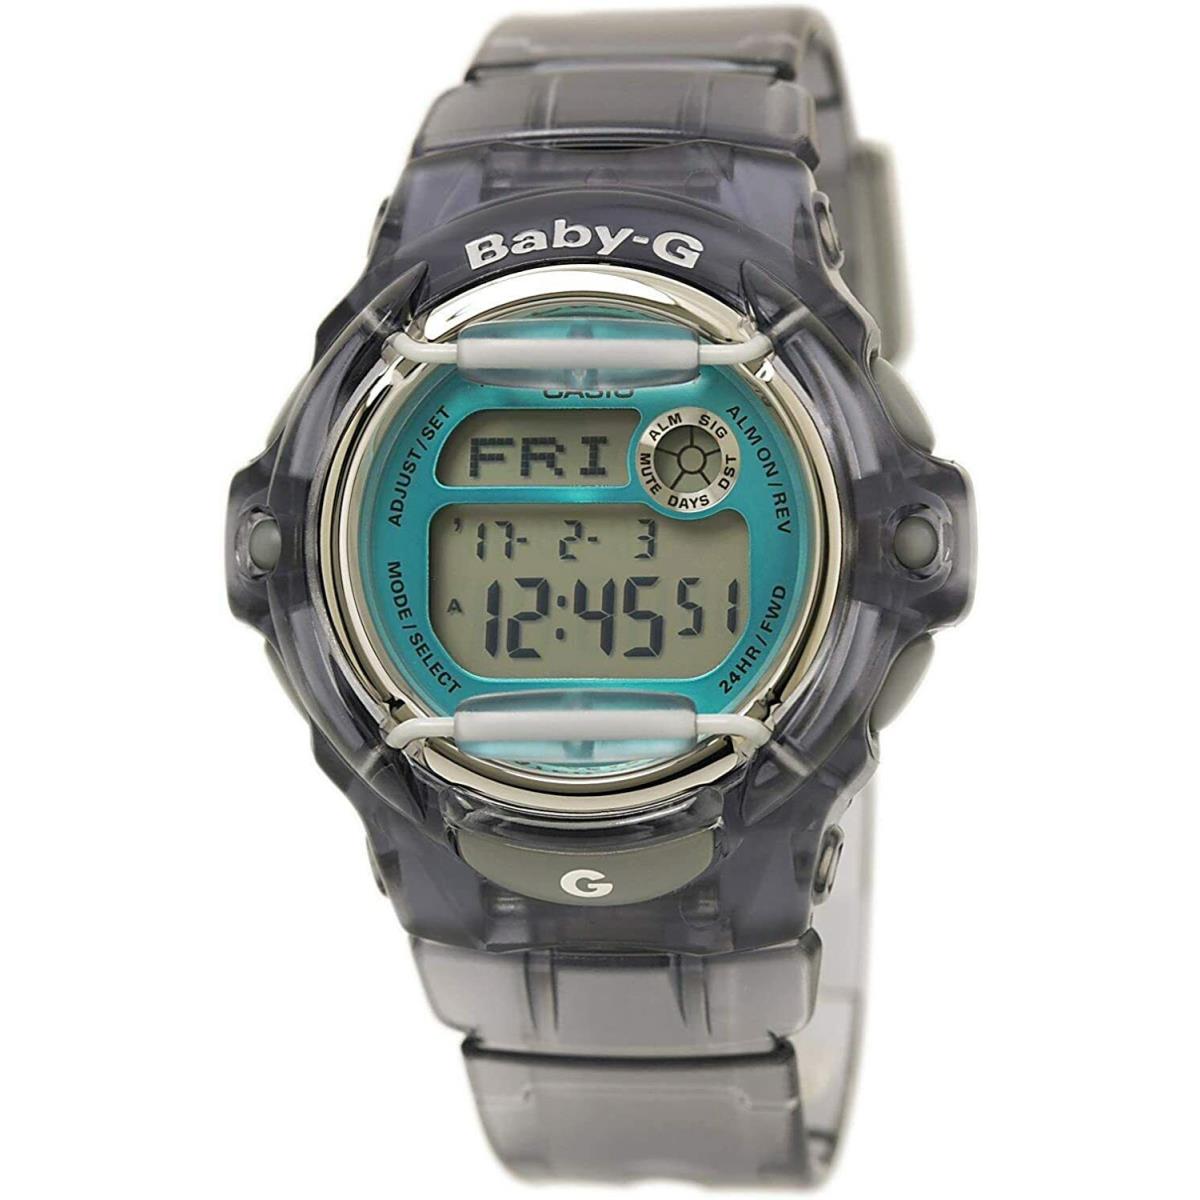 Casio Baby-g Shock BG169R-8B World Time Clear Gray Digital 200m Ladies Watch - Dial: Blue, Gray, Band: Gray, Manufacturer Band: Gray